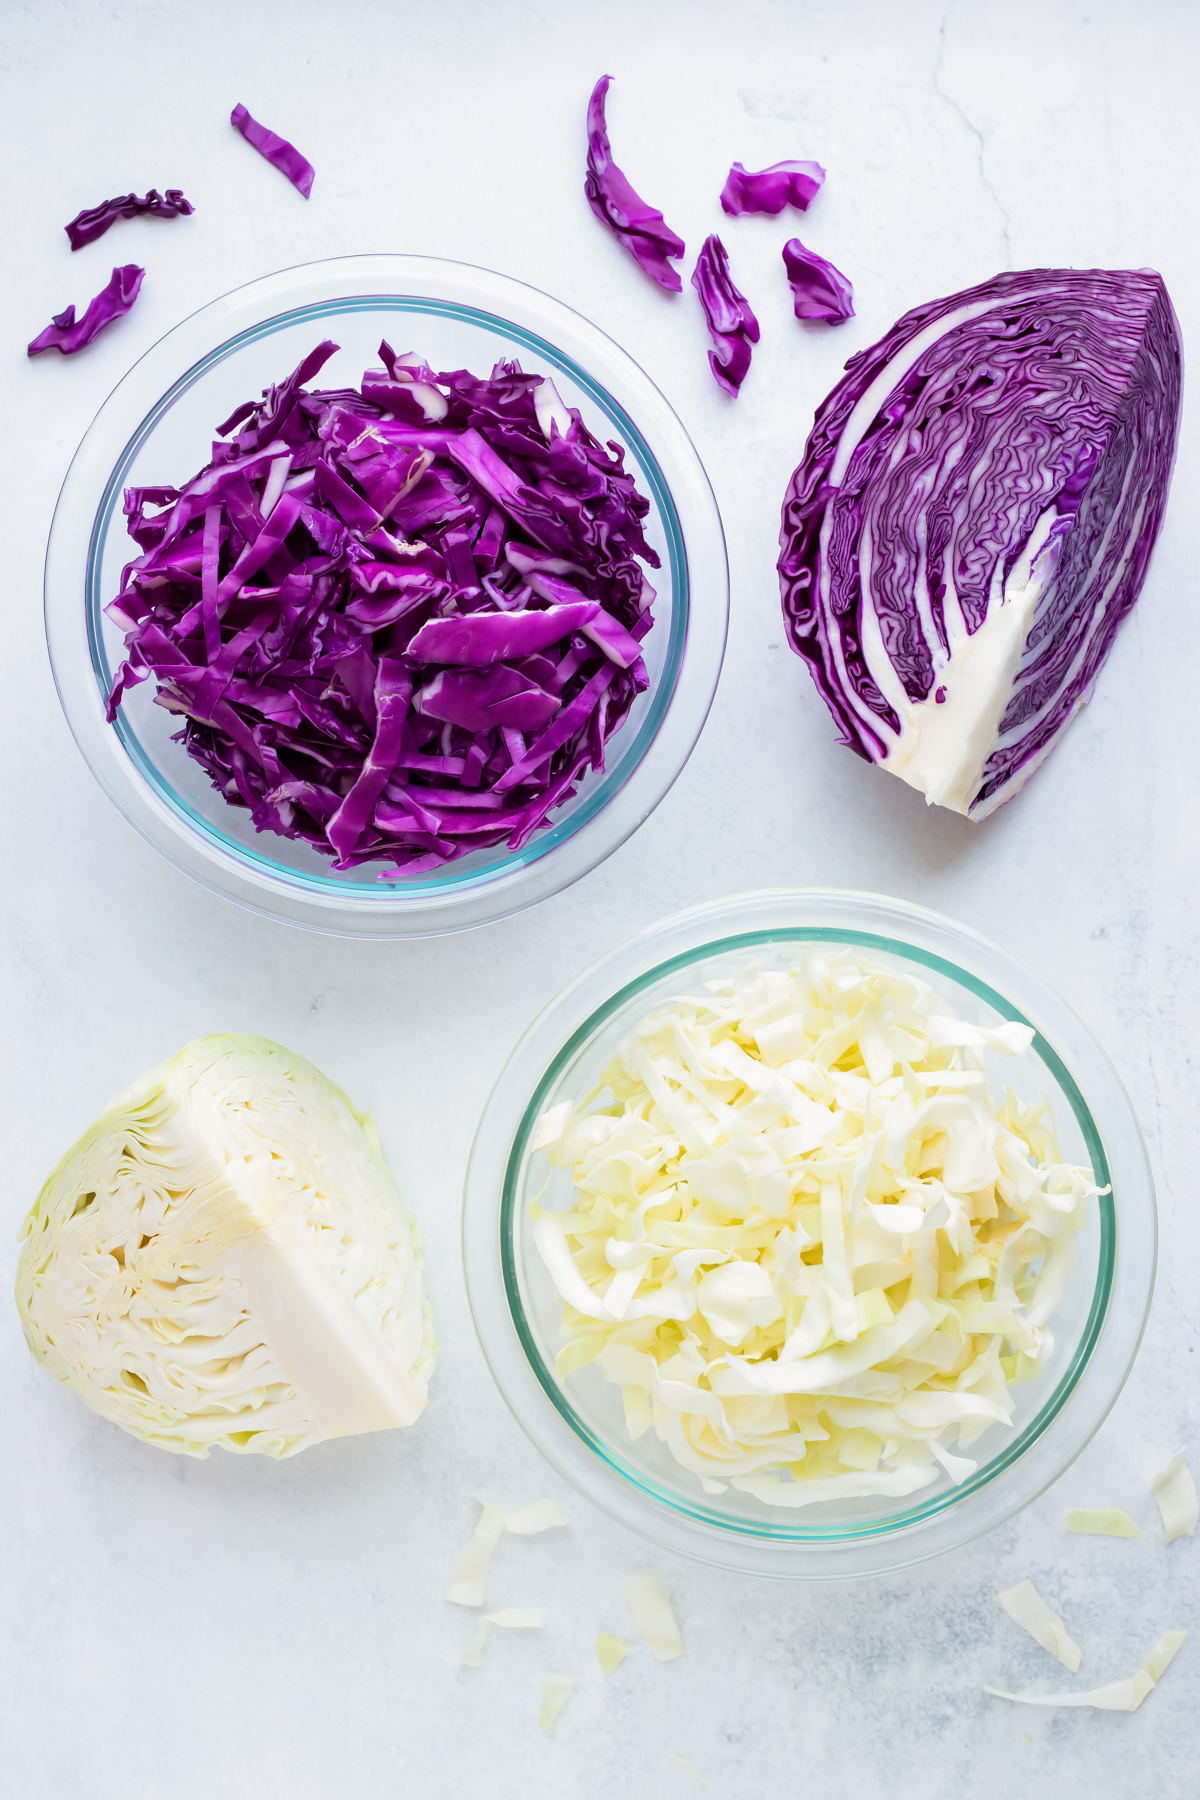 A bowl of shredded green cabbage beside a green cabbage wedge, and a bowl of shredded red cabbage beside a red cabbage wedge.